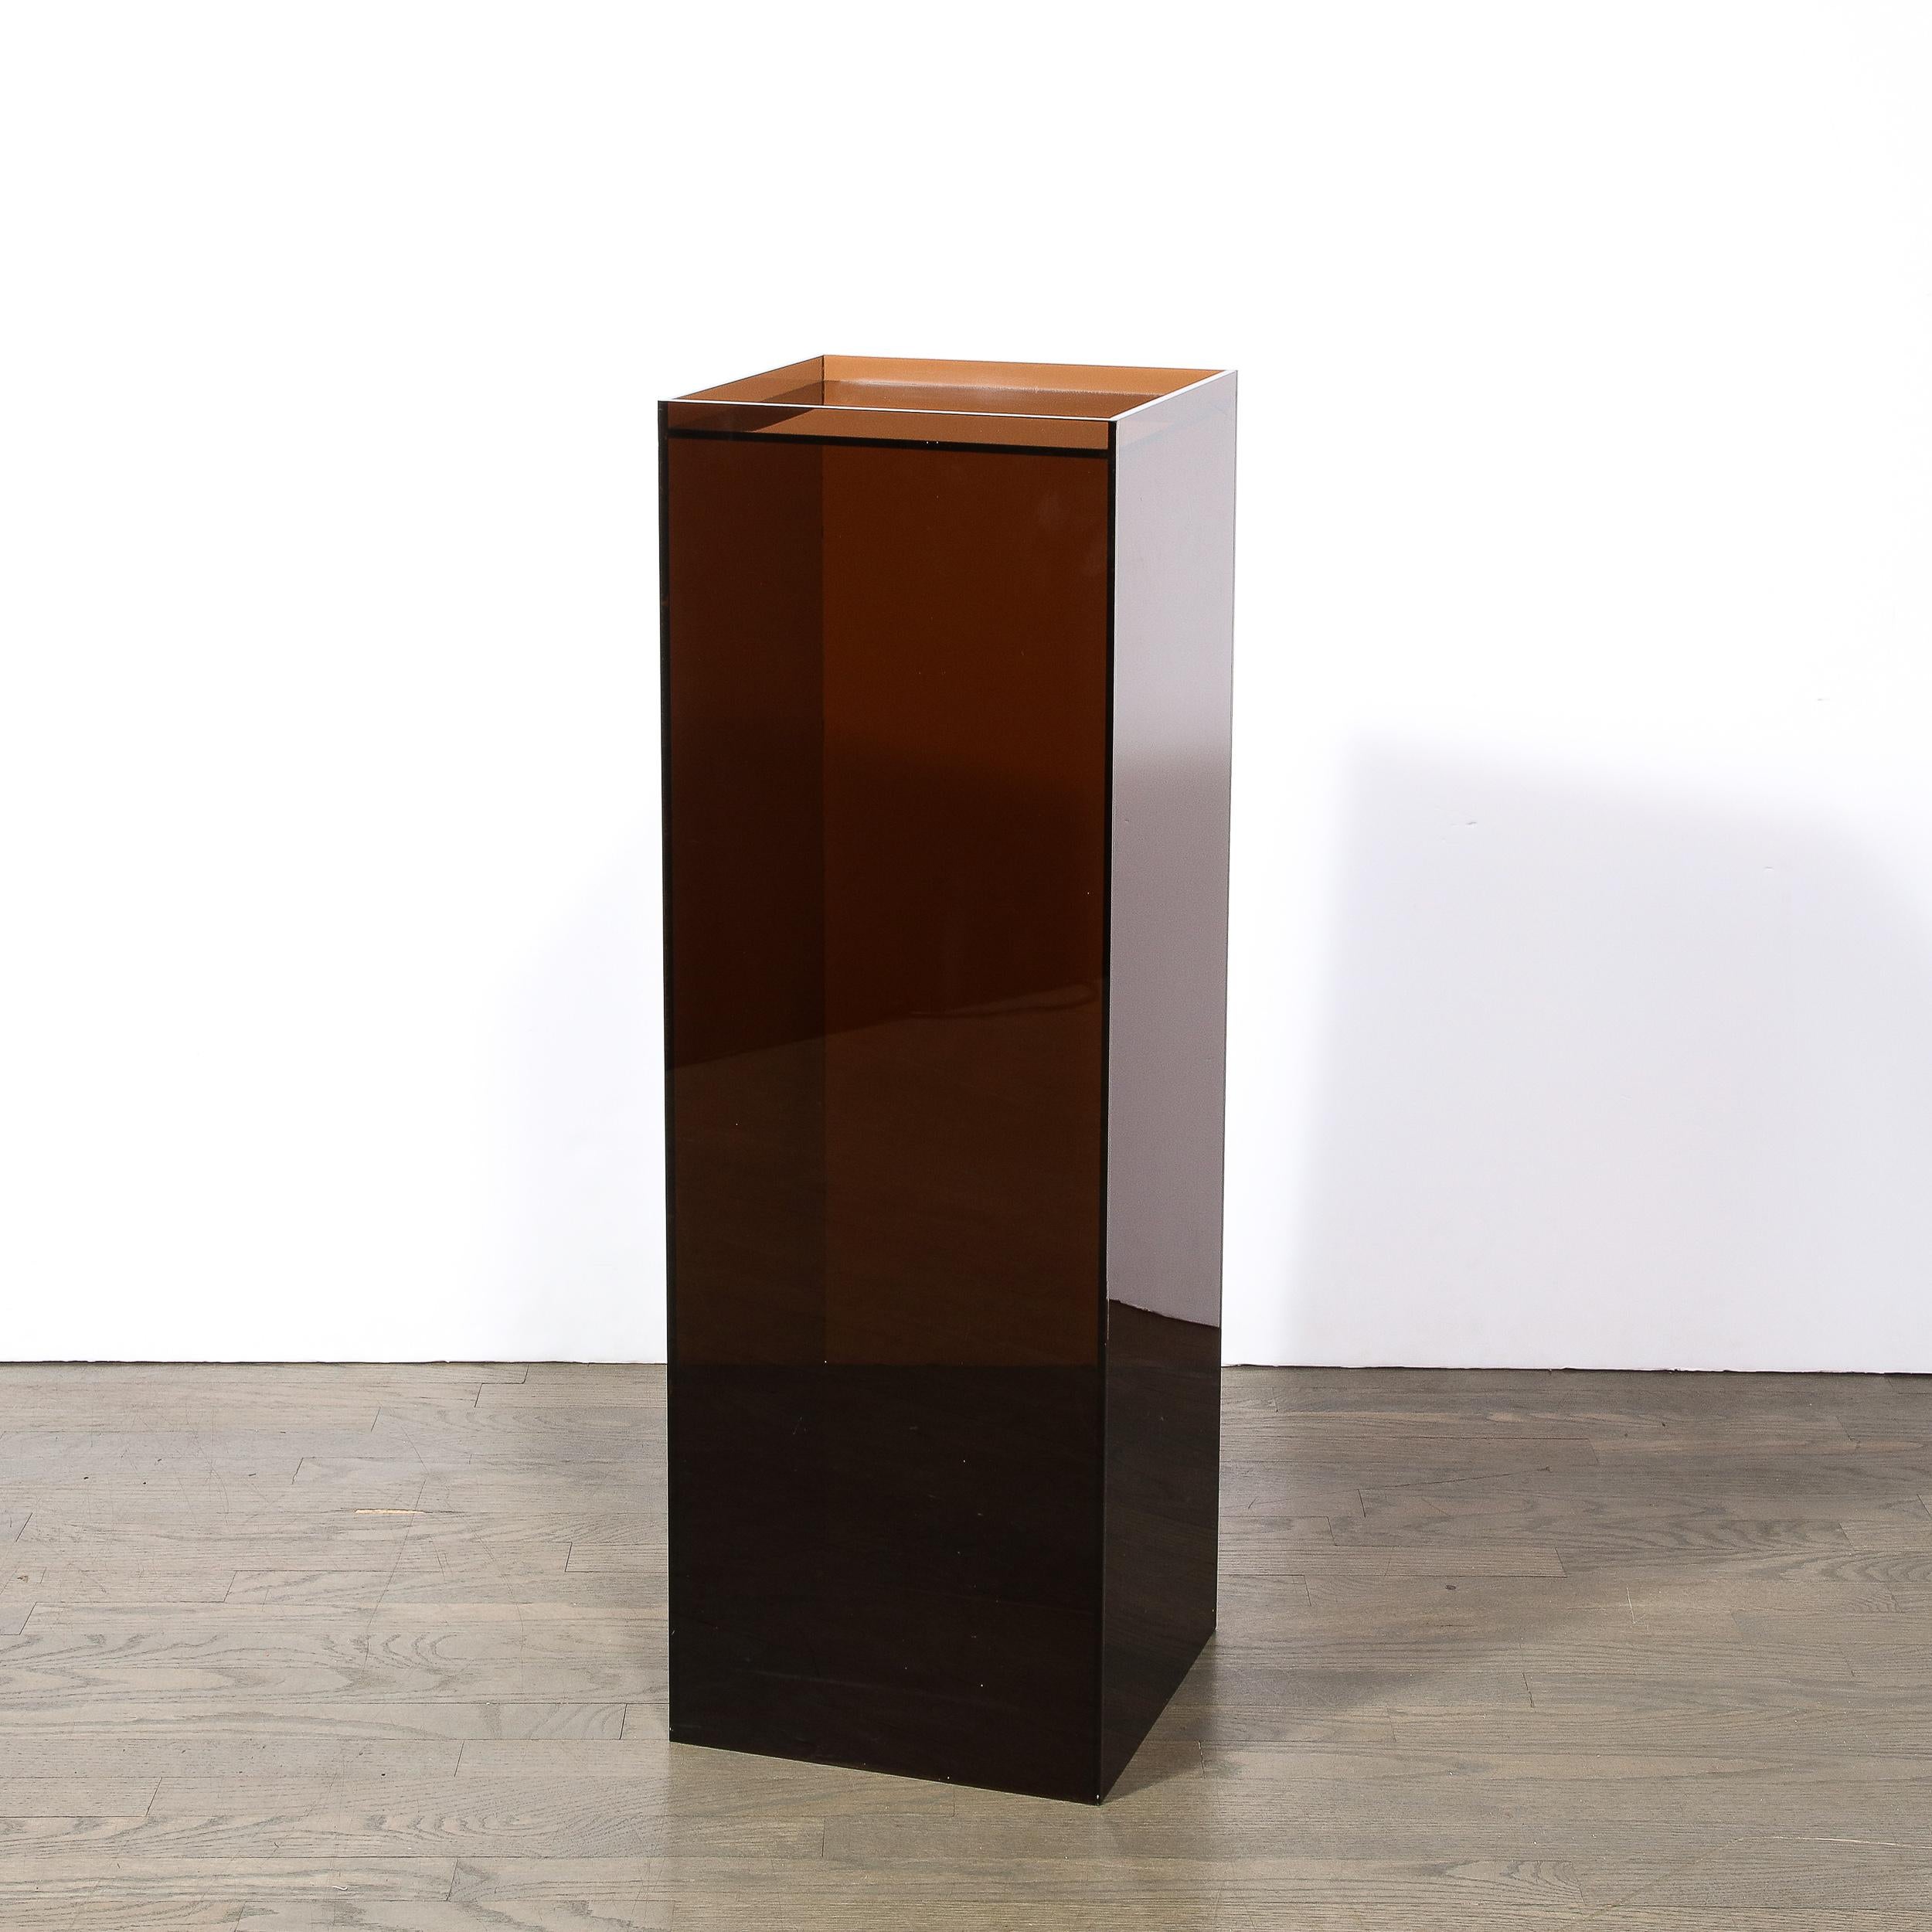 Late 20th Century Mid-Century Modernist Pedestal in Smoked Bronze Lucite with Inset Mirror Top